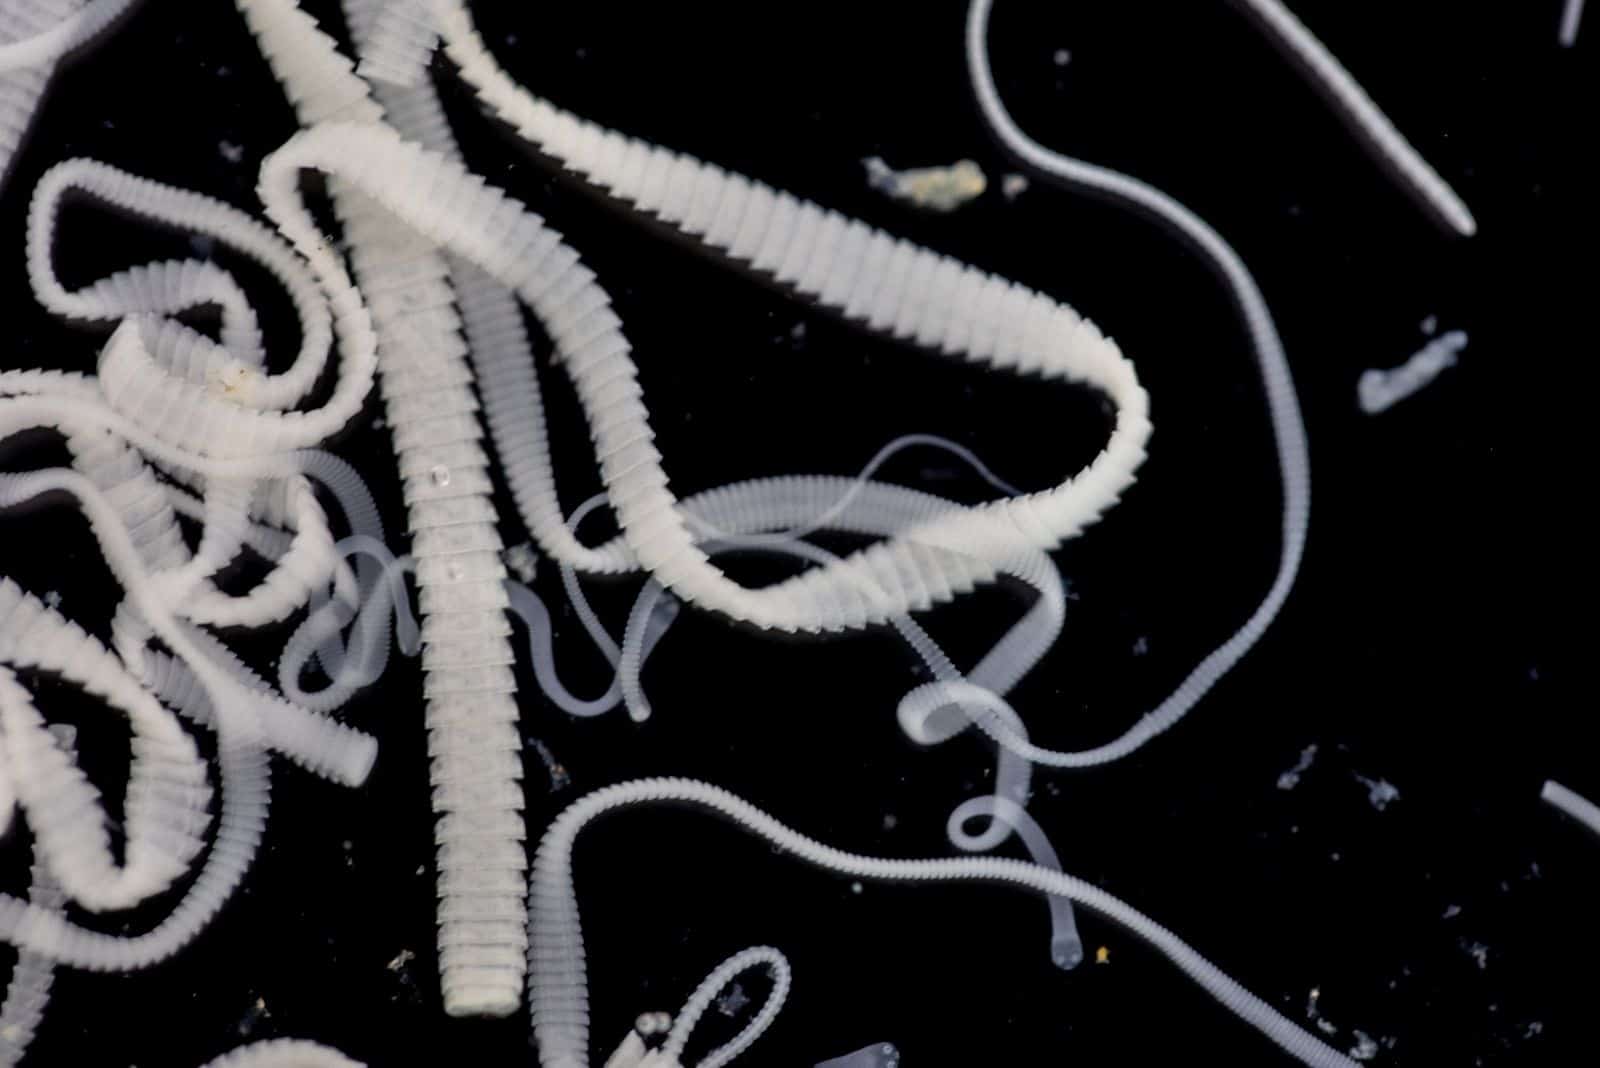 tapeworm in close up microscopic image in black background